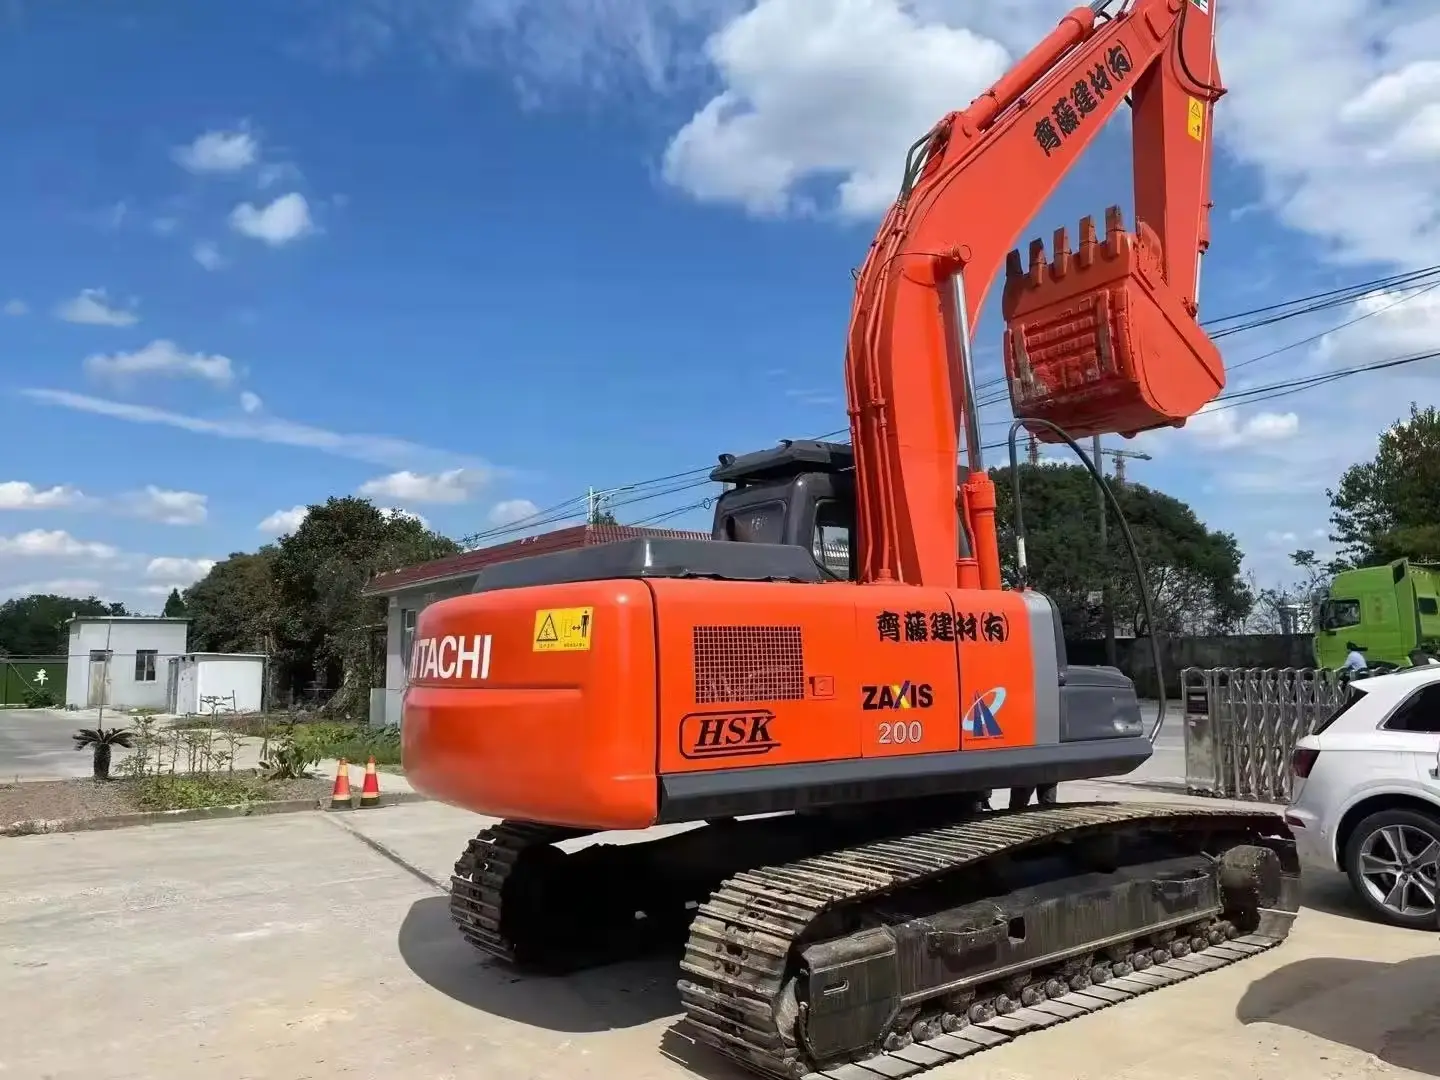 used good quality made in japan hitachi crawler excavator zx200 20 ton excavator hitachi zx200 excavator